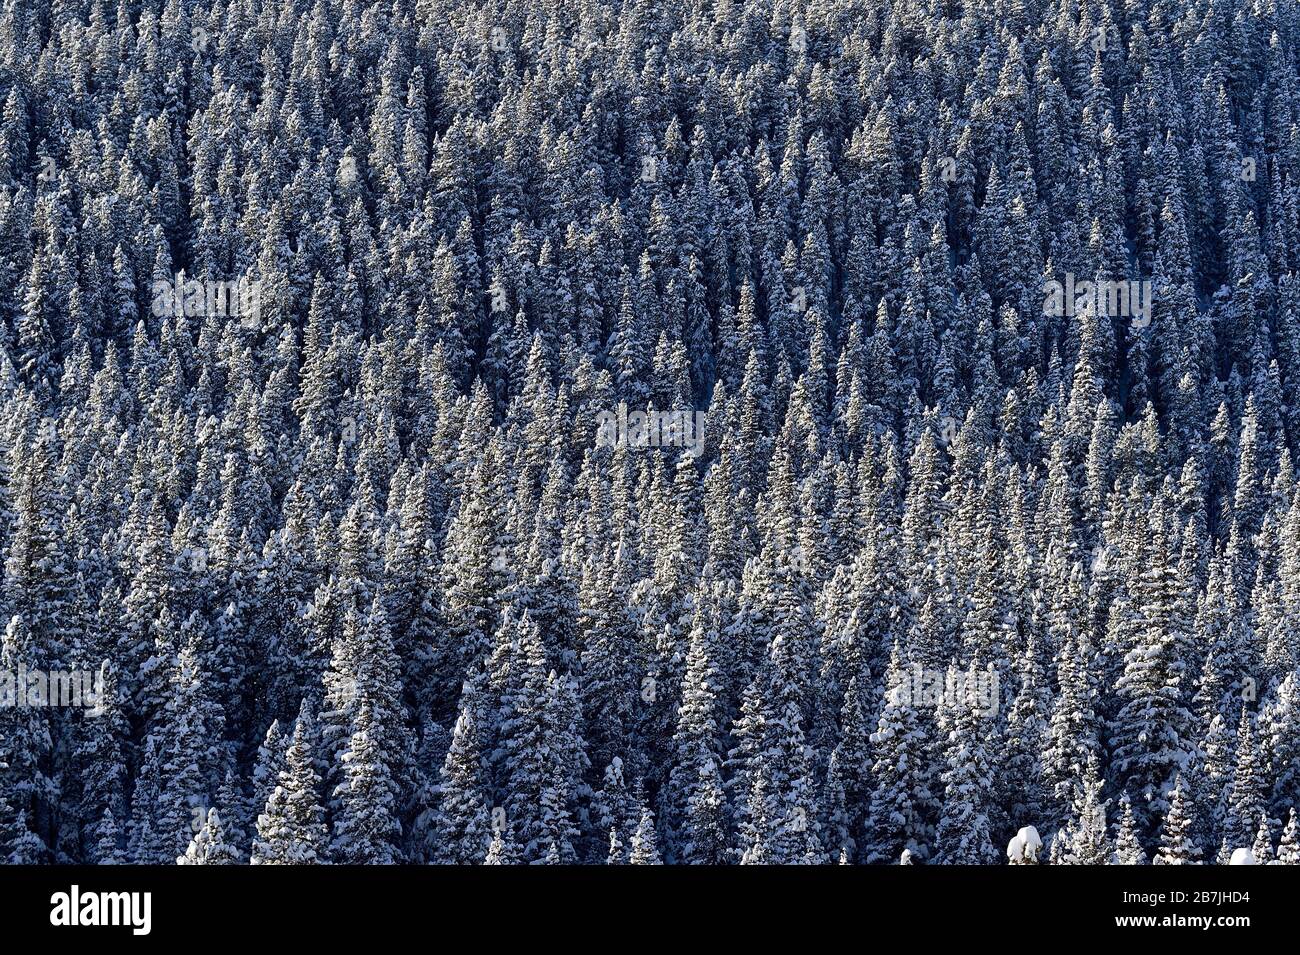 A stand of evergreen trees covered with the snow of an Alberta winter in rural Alberta Canada. Stock Photo